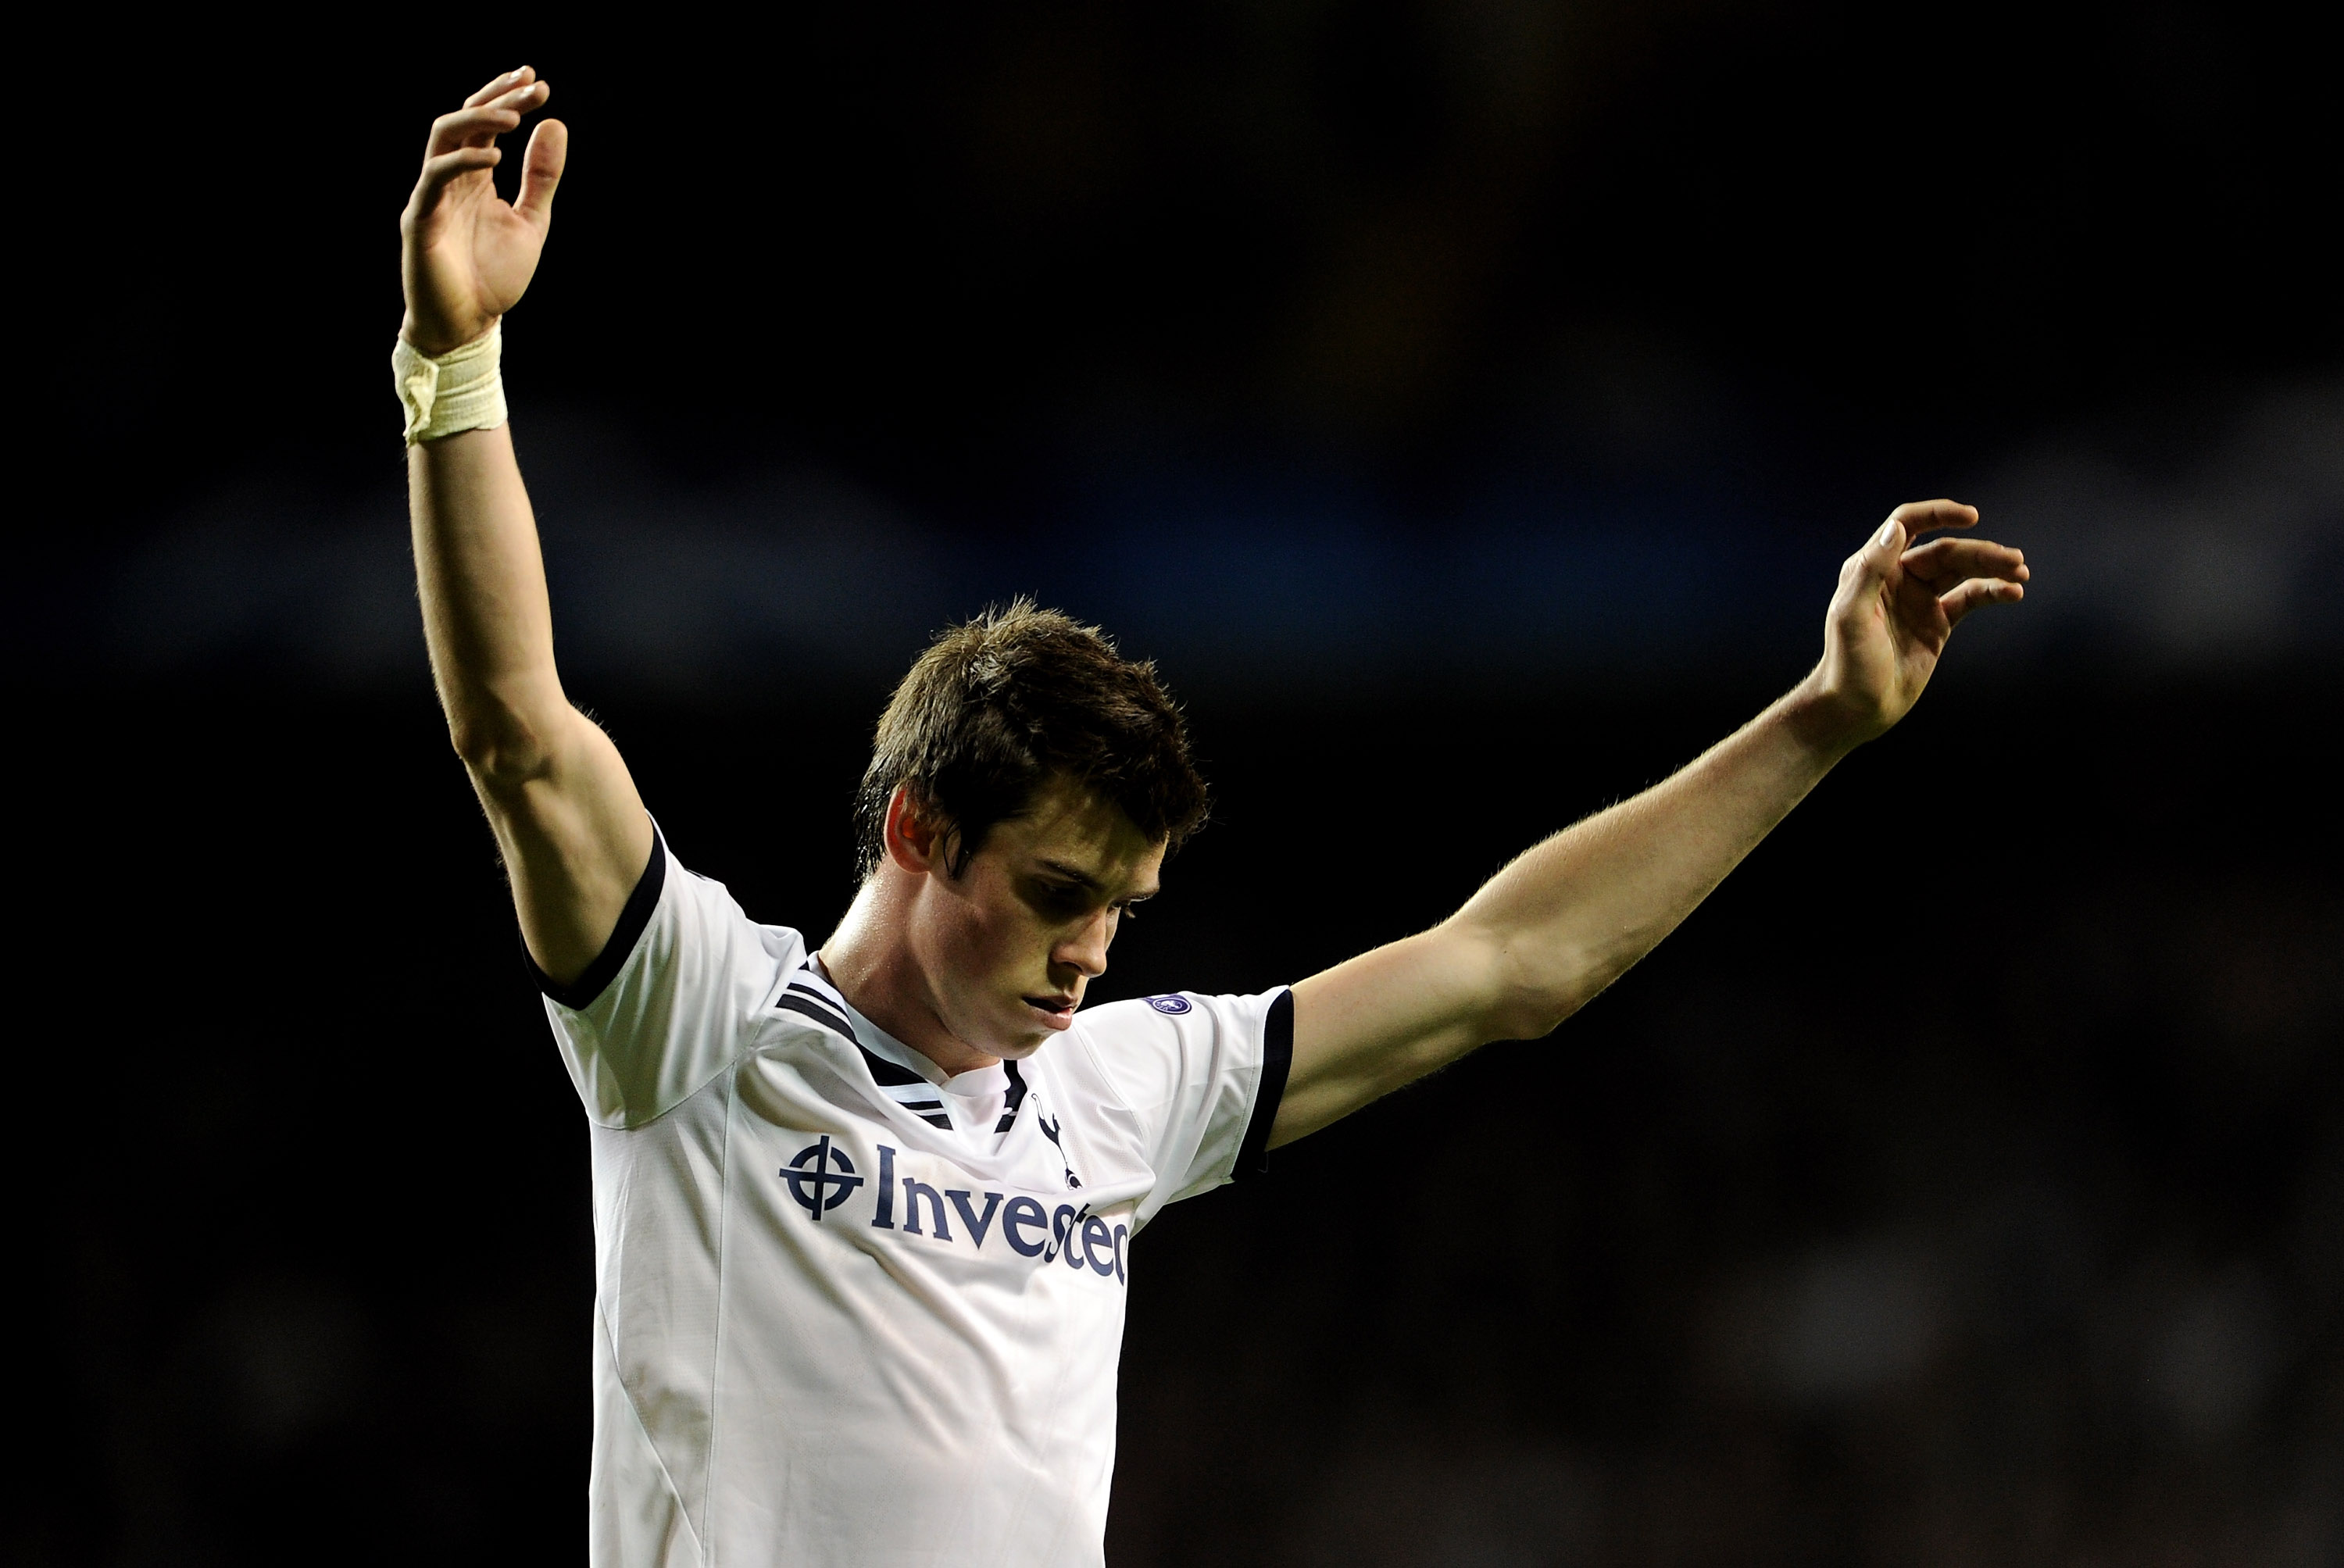 LONDON, ENGLAND - APRIL 13:  Gareth Bale of Spurs shows his dejection during the UEFA Champions League quarter final second leg match between Tottenham Hotspur and Real Madrid at White Hart Lane on April 13, 2011 in London, England.  (Photo by Jasper Juin